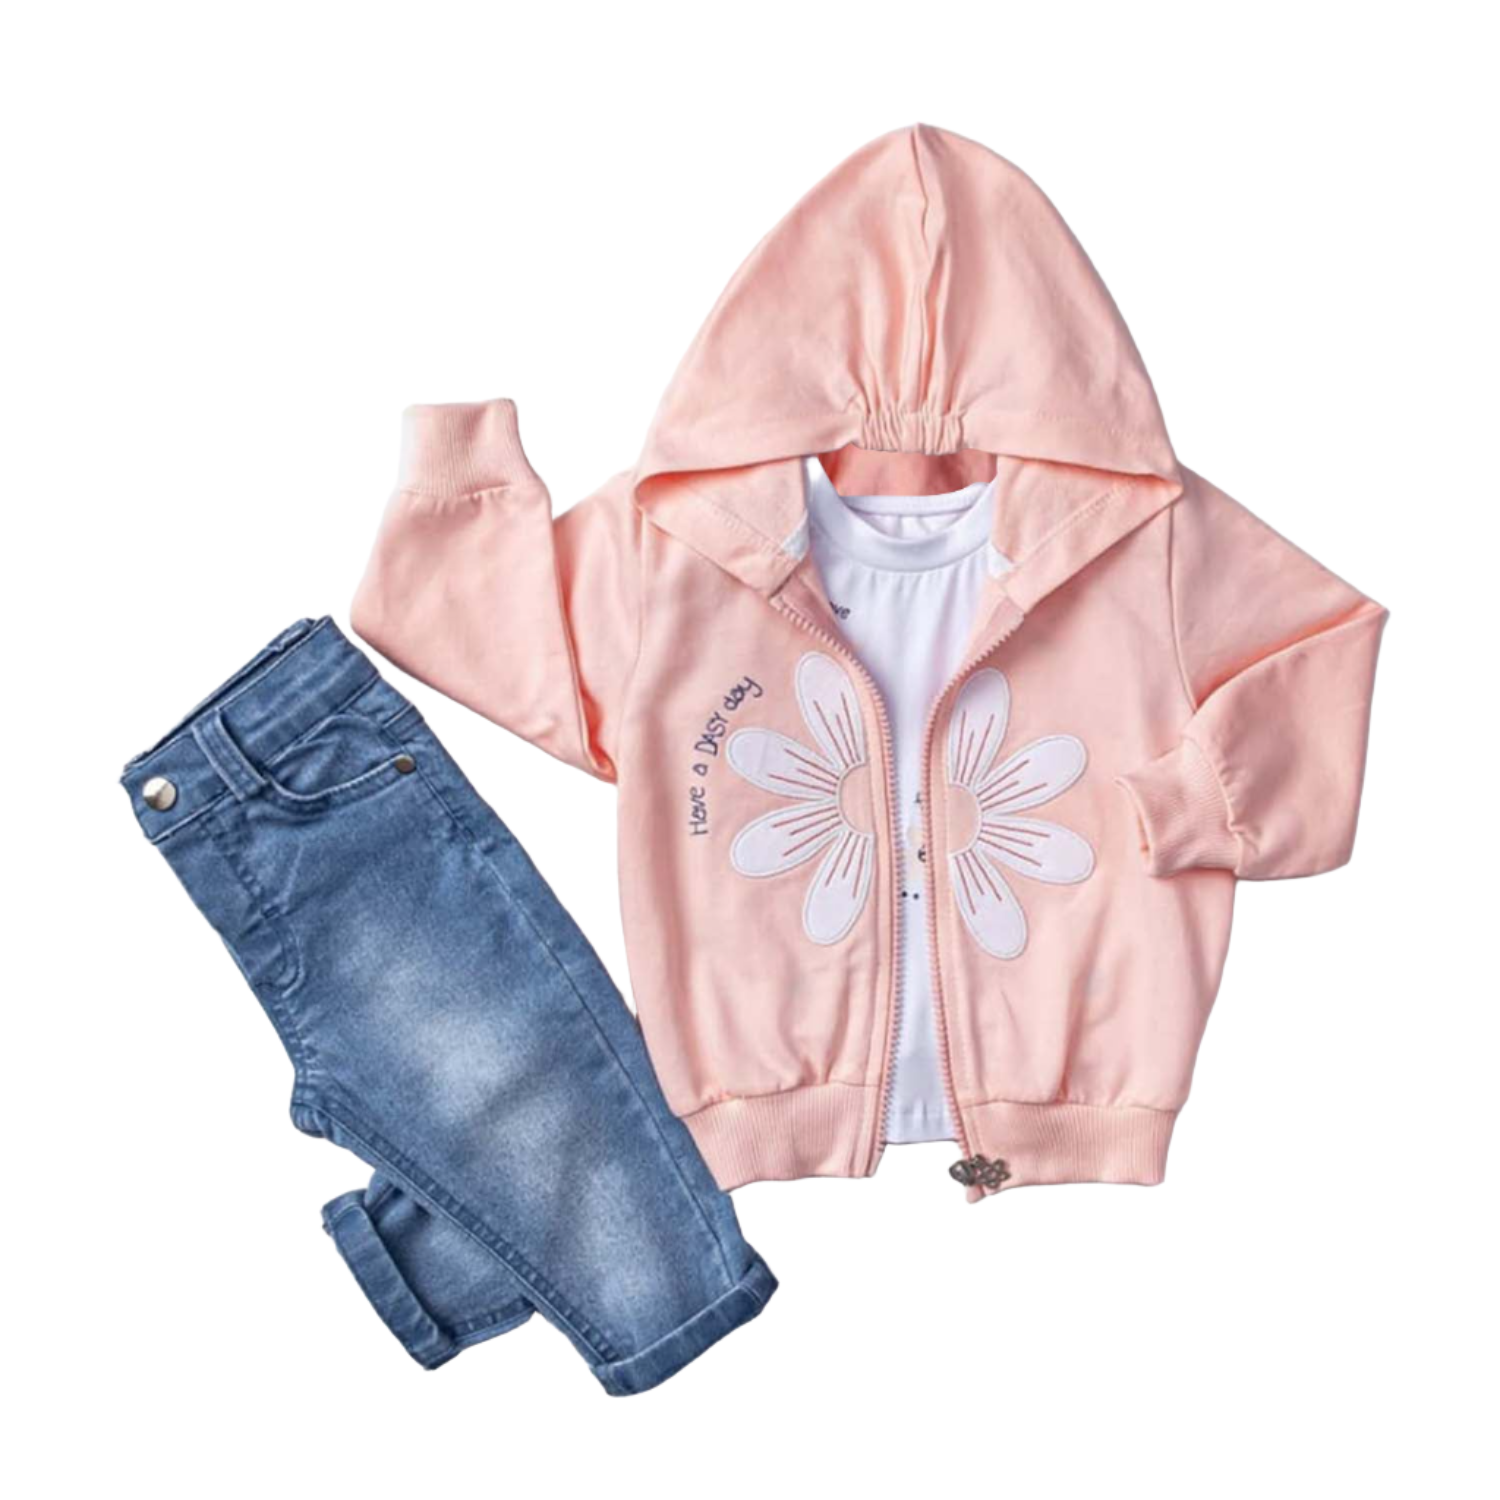 Little Girls' Colorful Hoodie Jacket, Jeans and T-Shirt 3-Piece Set